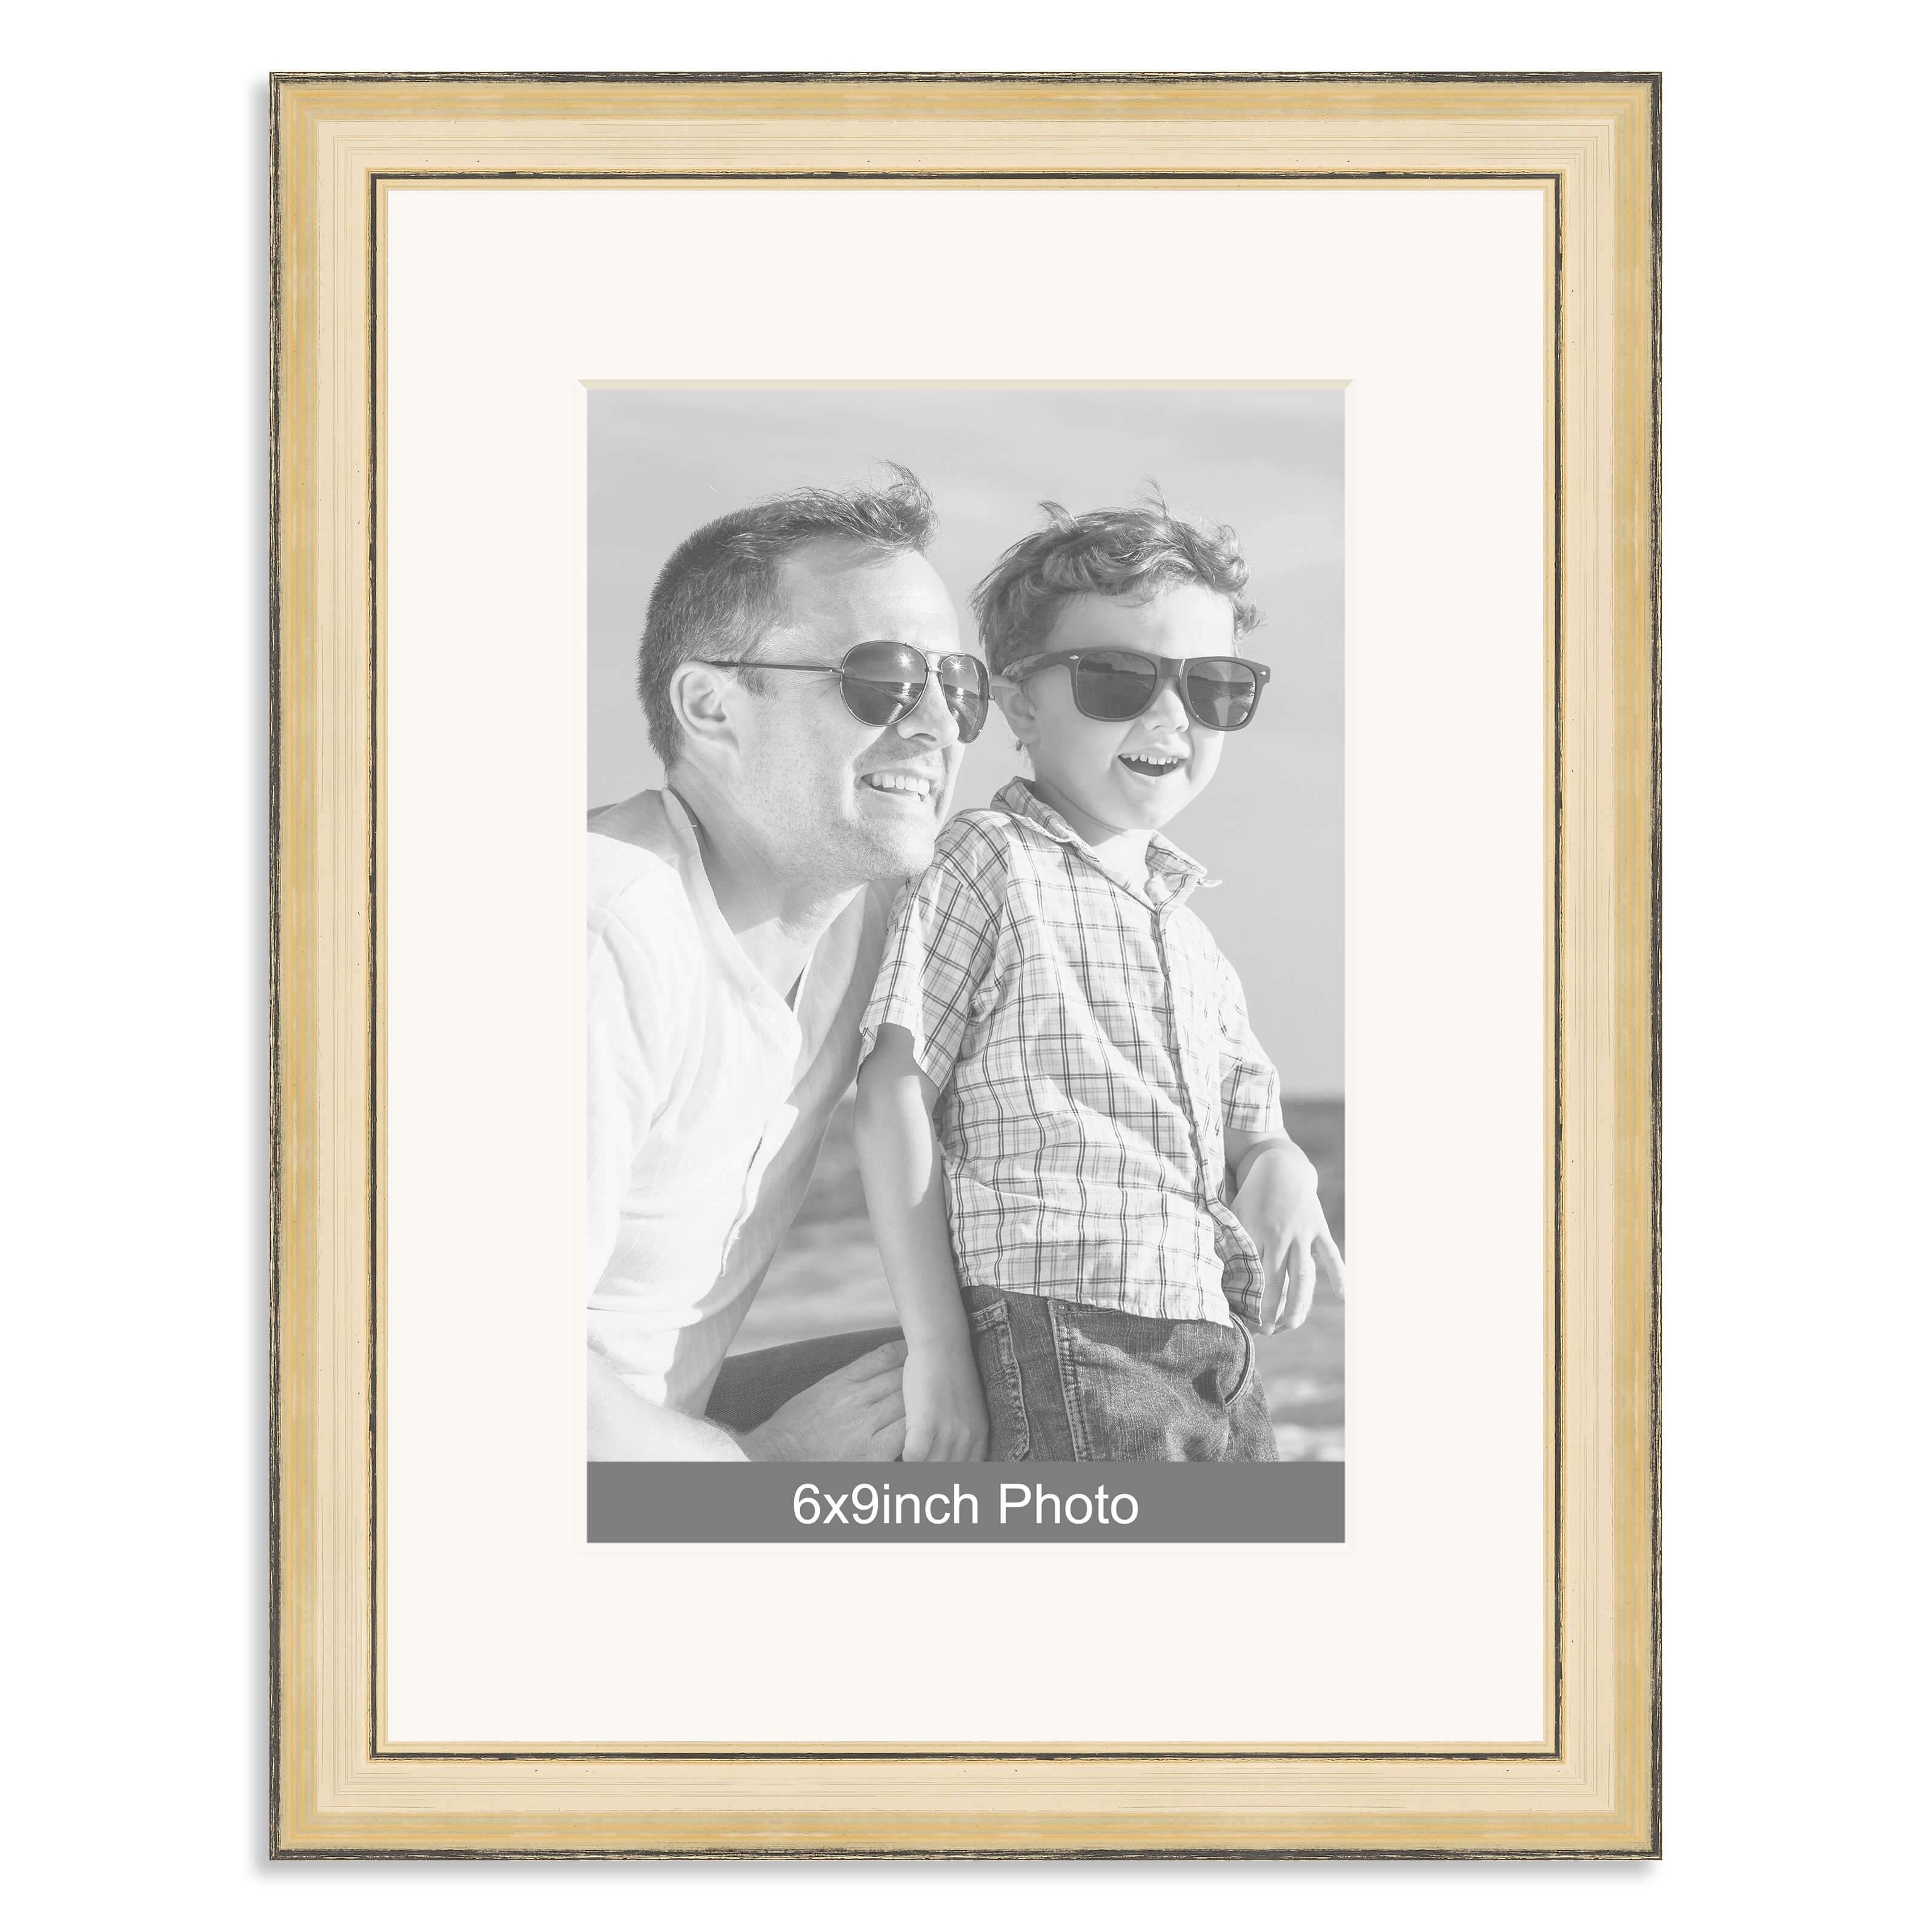 Gold Wooden Photo Frame with mount for a 9×6/6x9in Photo – Photo uploaded below